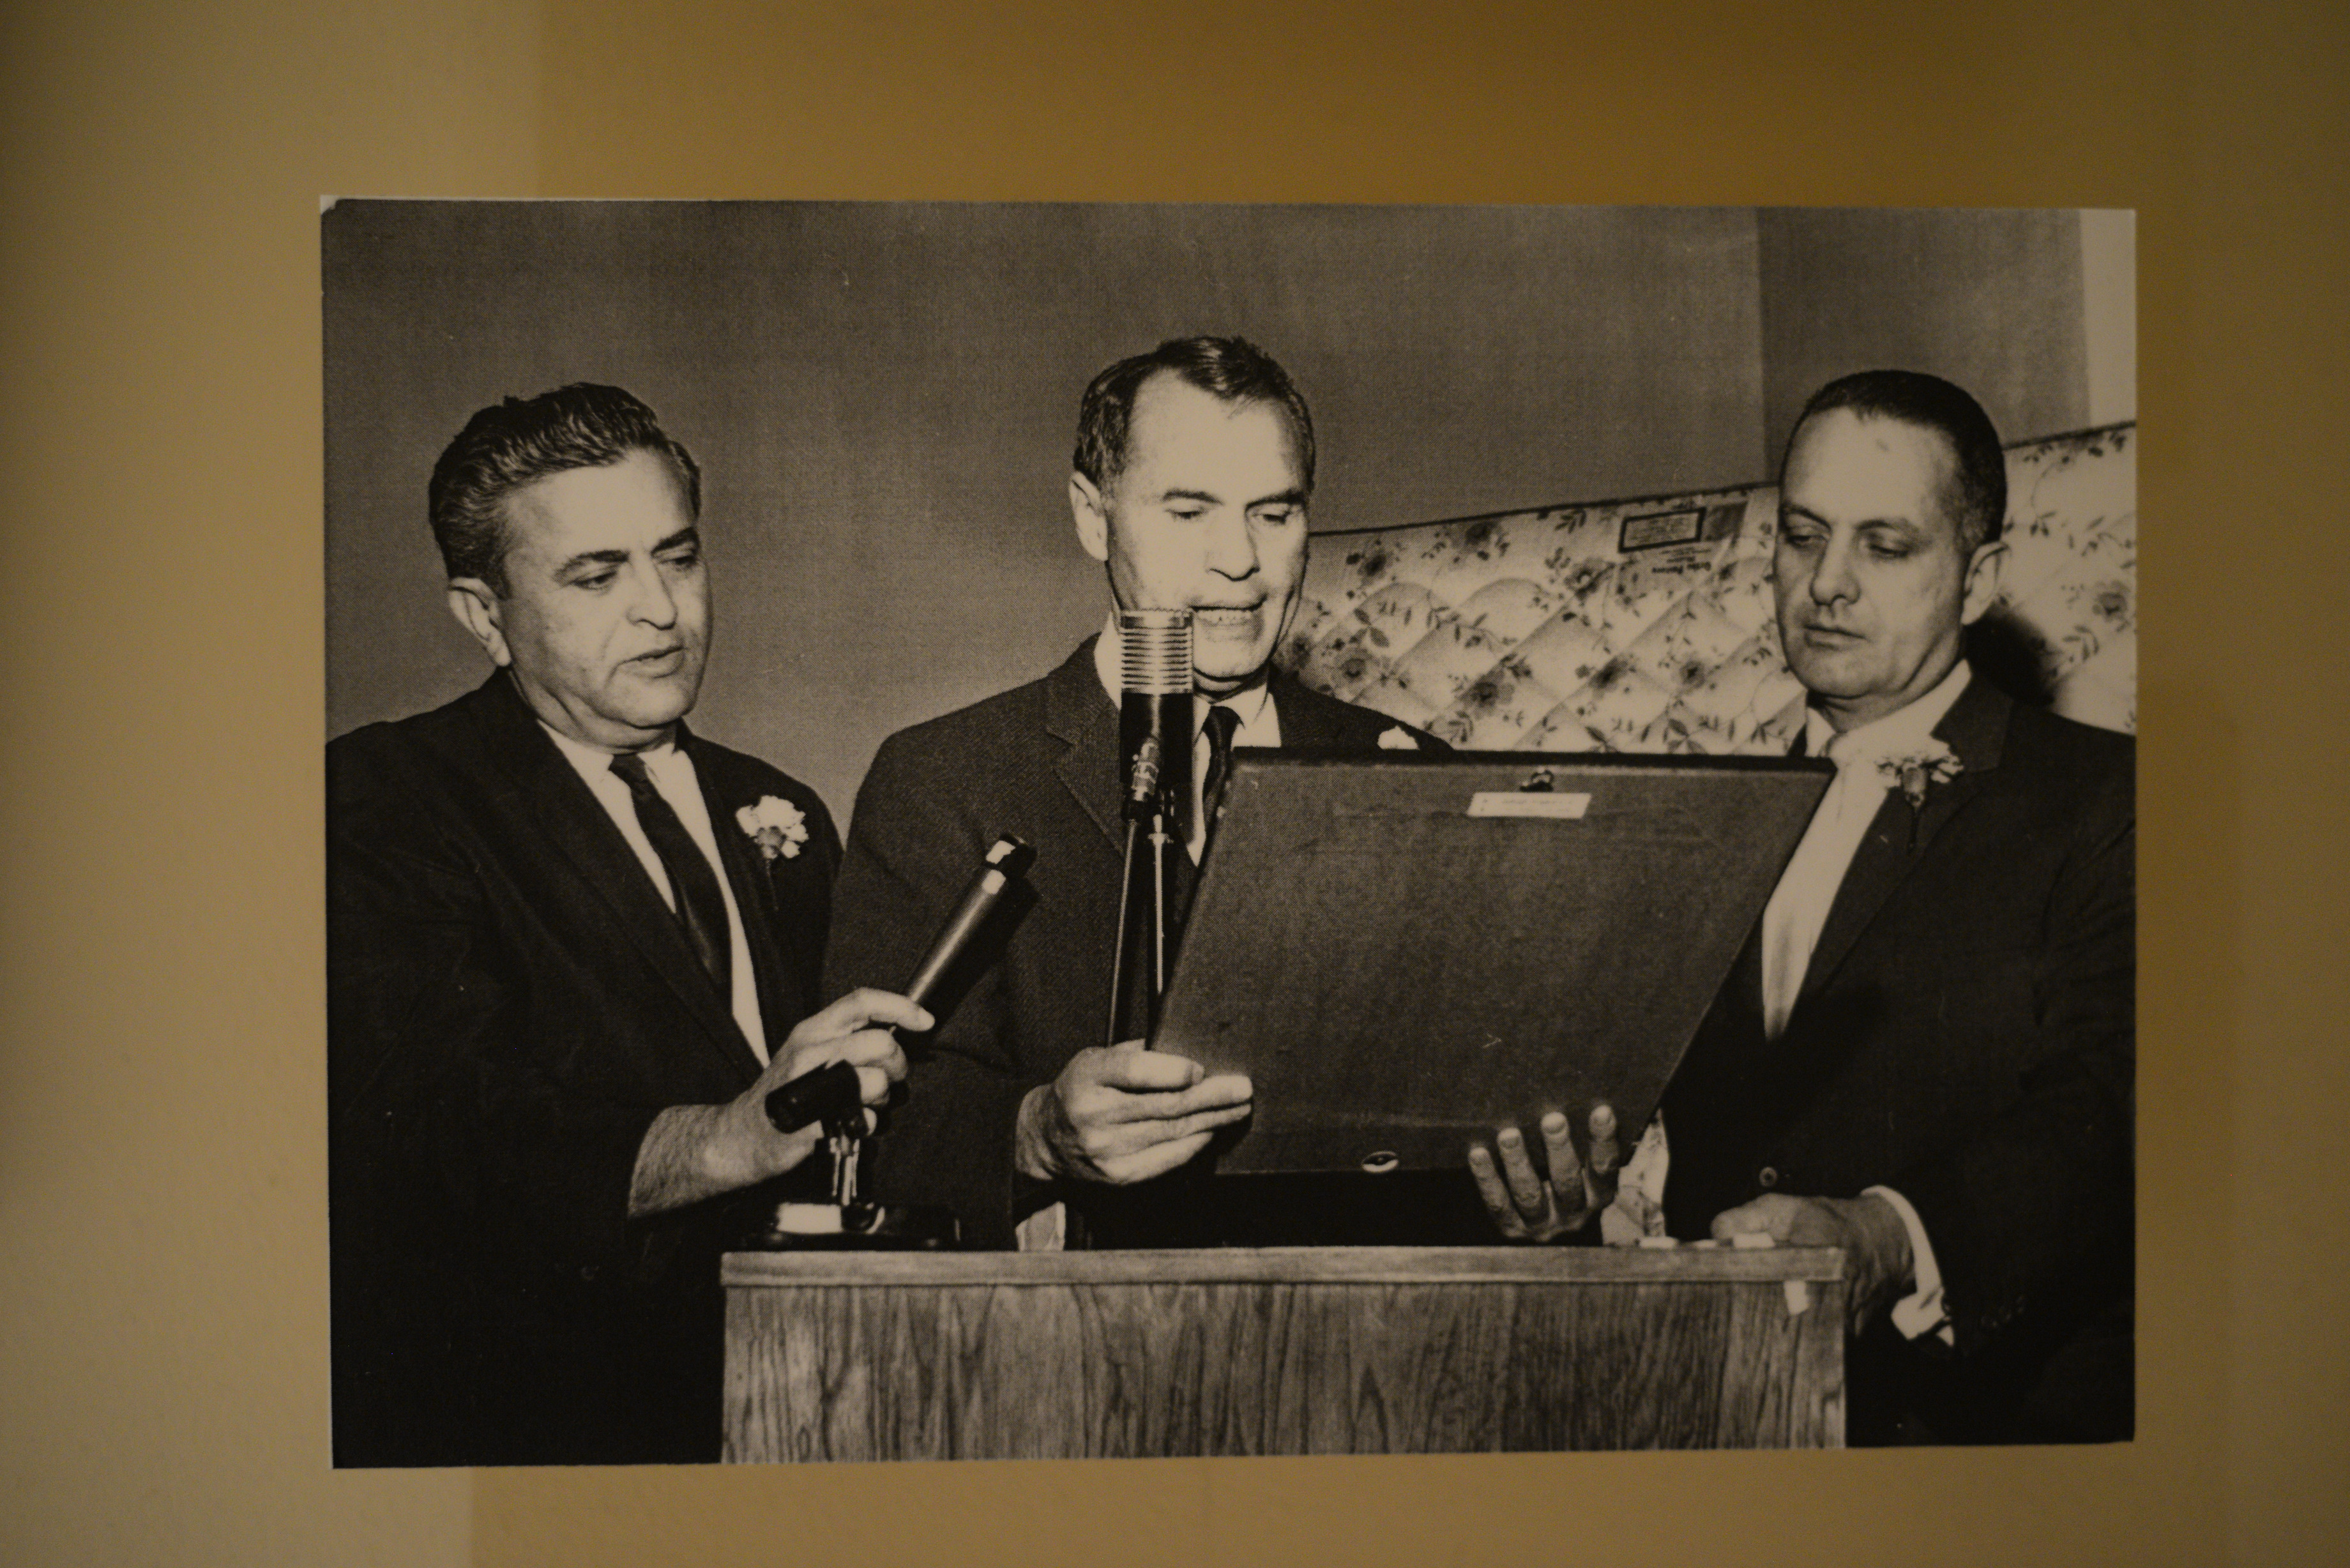 Photograph of Hank Greenspun (center) and others at a podium, date unknown